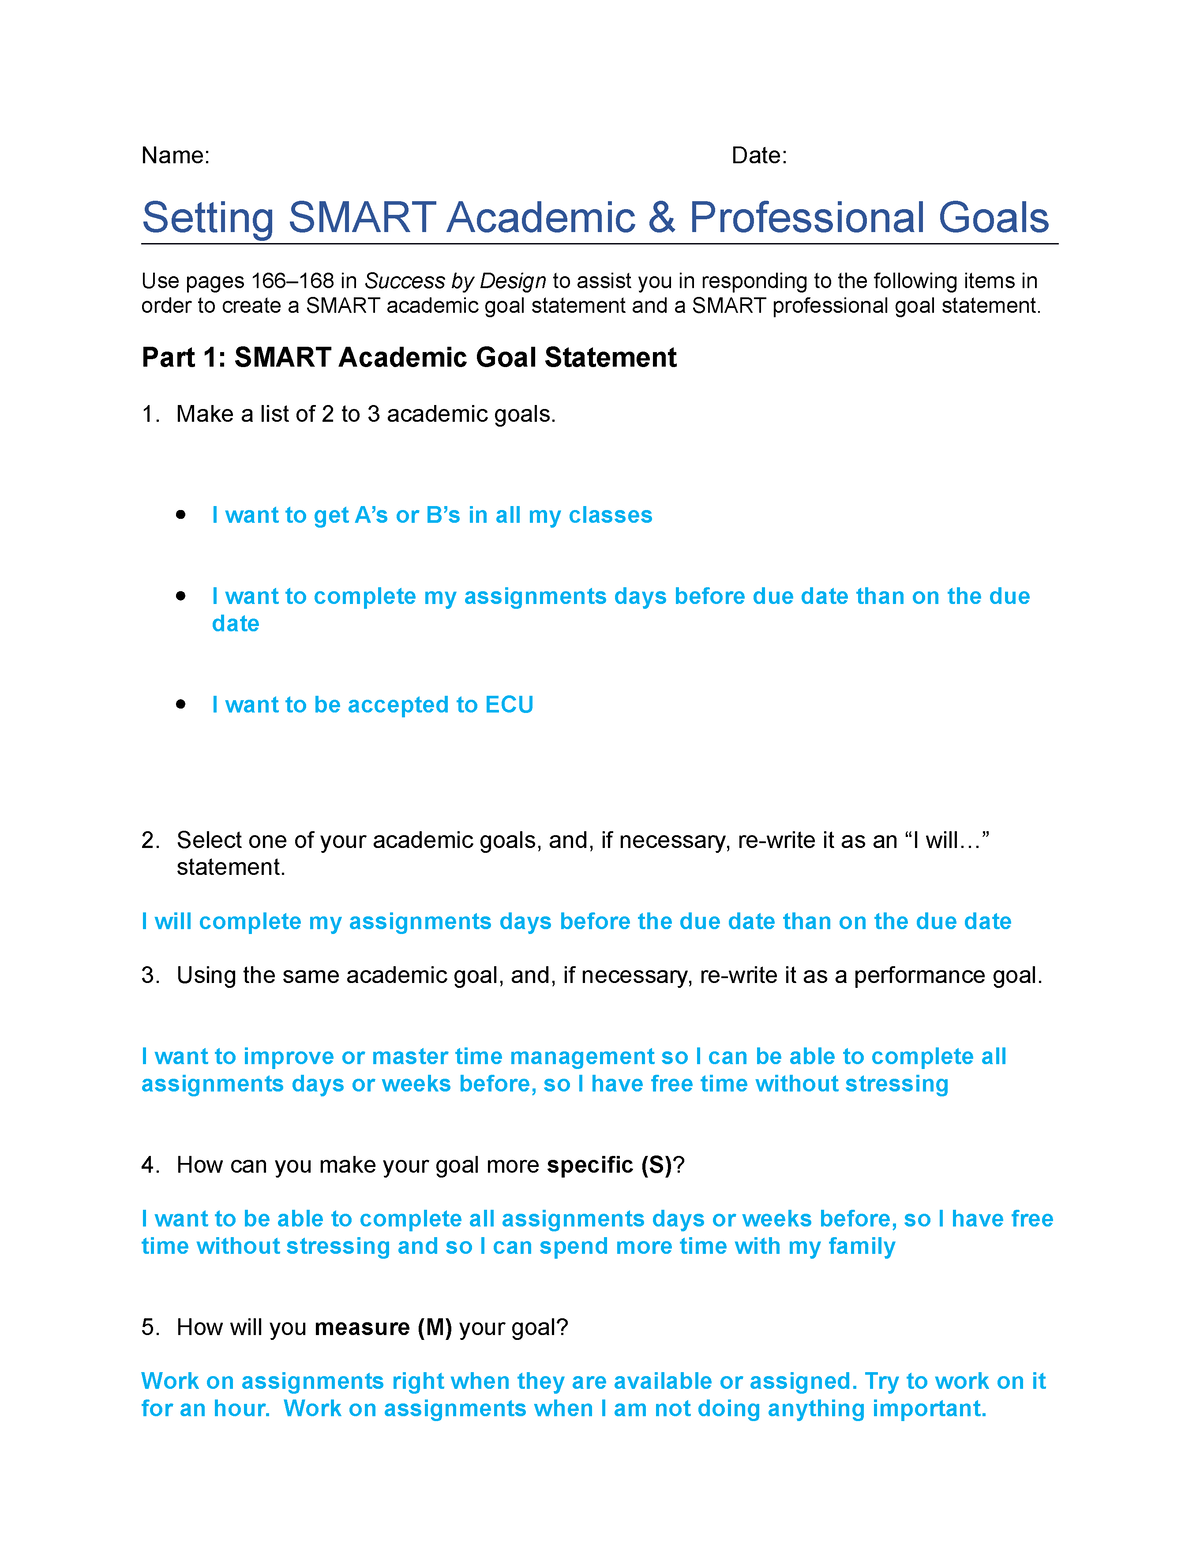 Setting Smart Goals Assignment - Name: Date: Setting SMART Academic ...